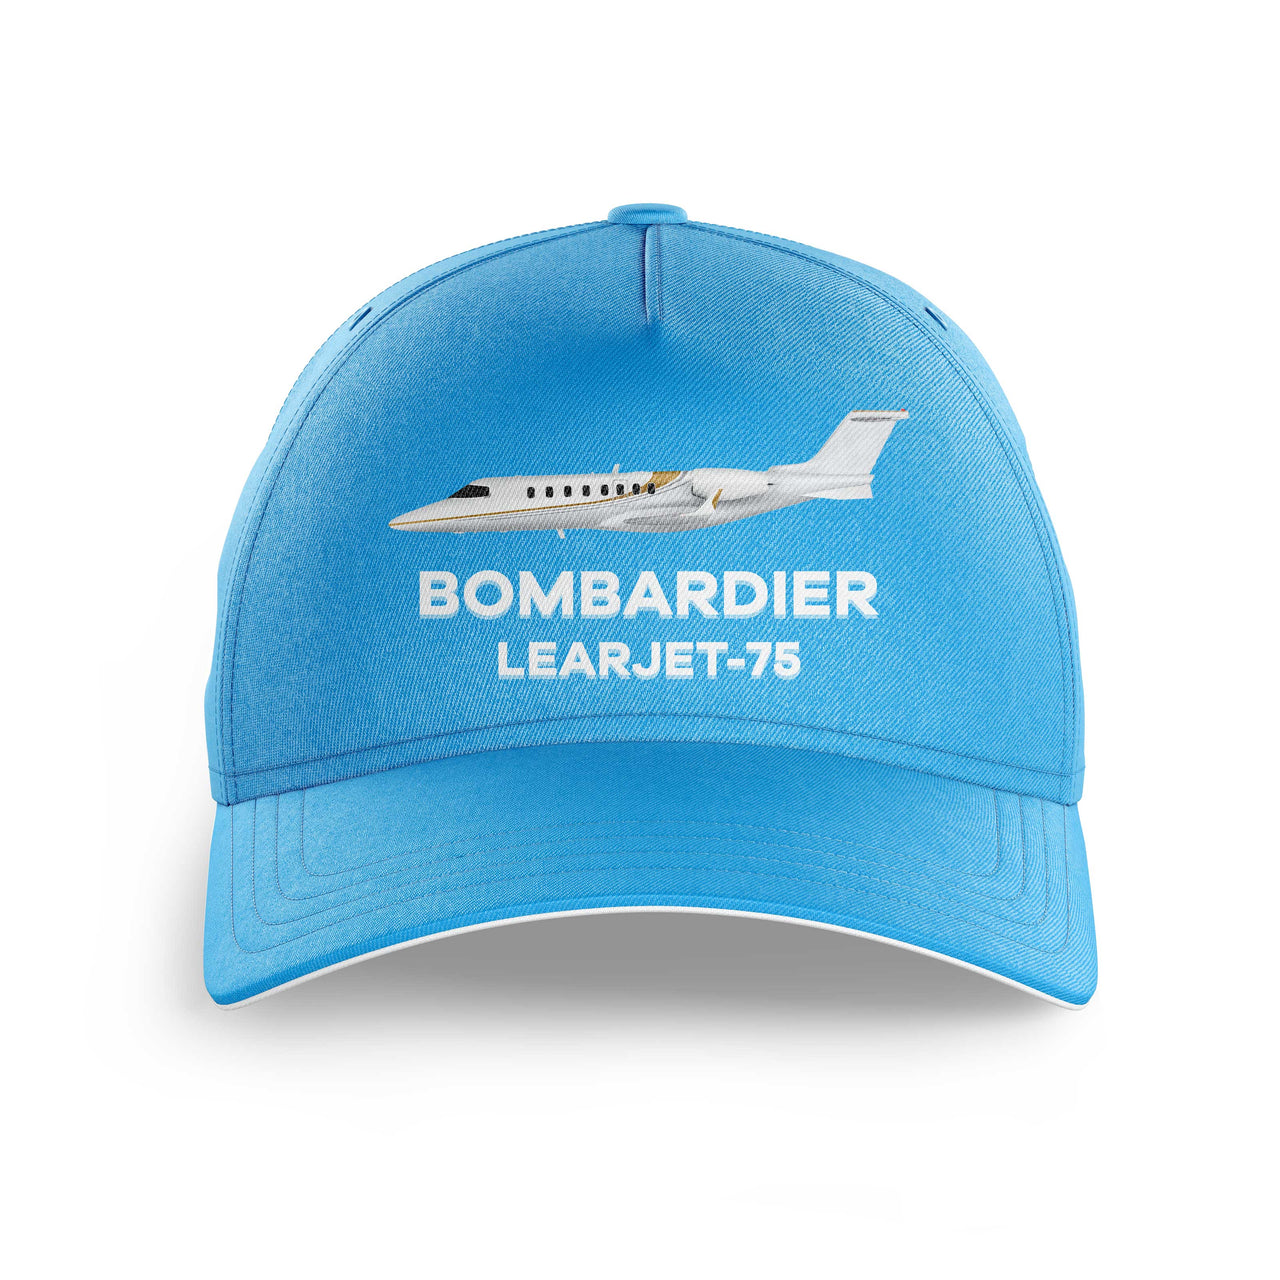 The Bombardier Learjet 75 Printed Hats